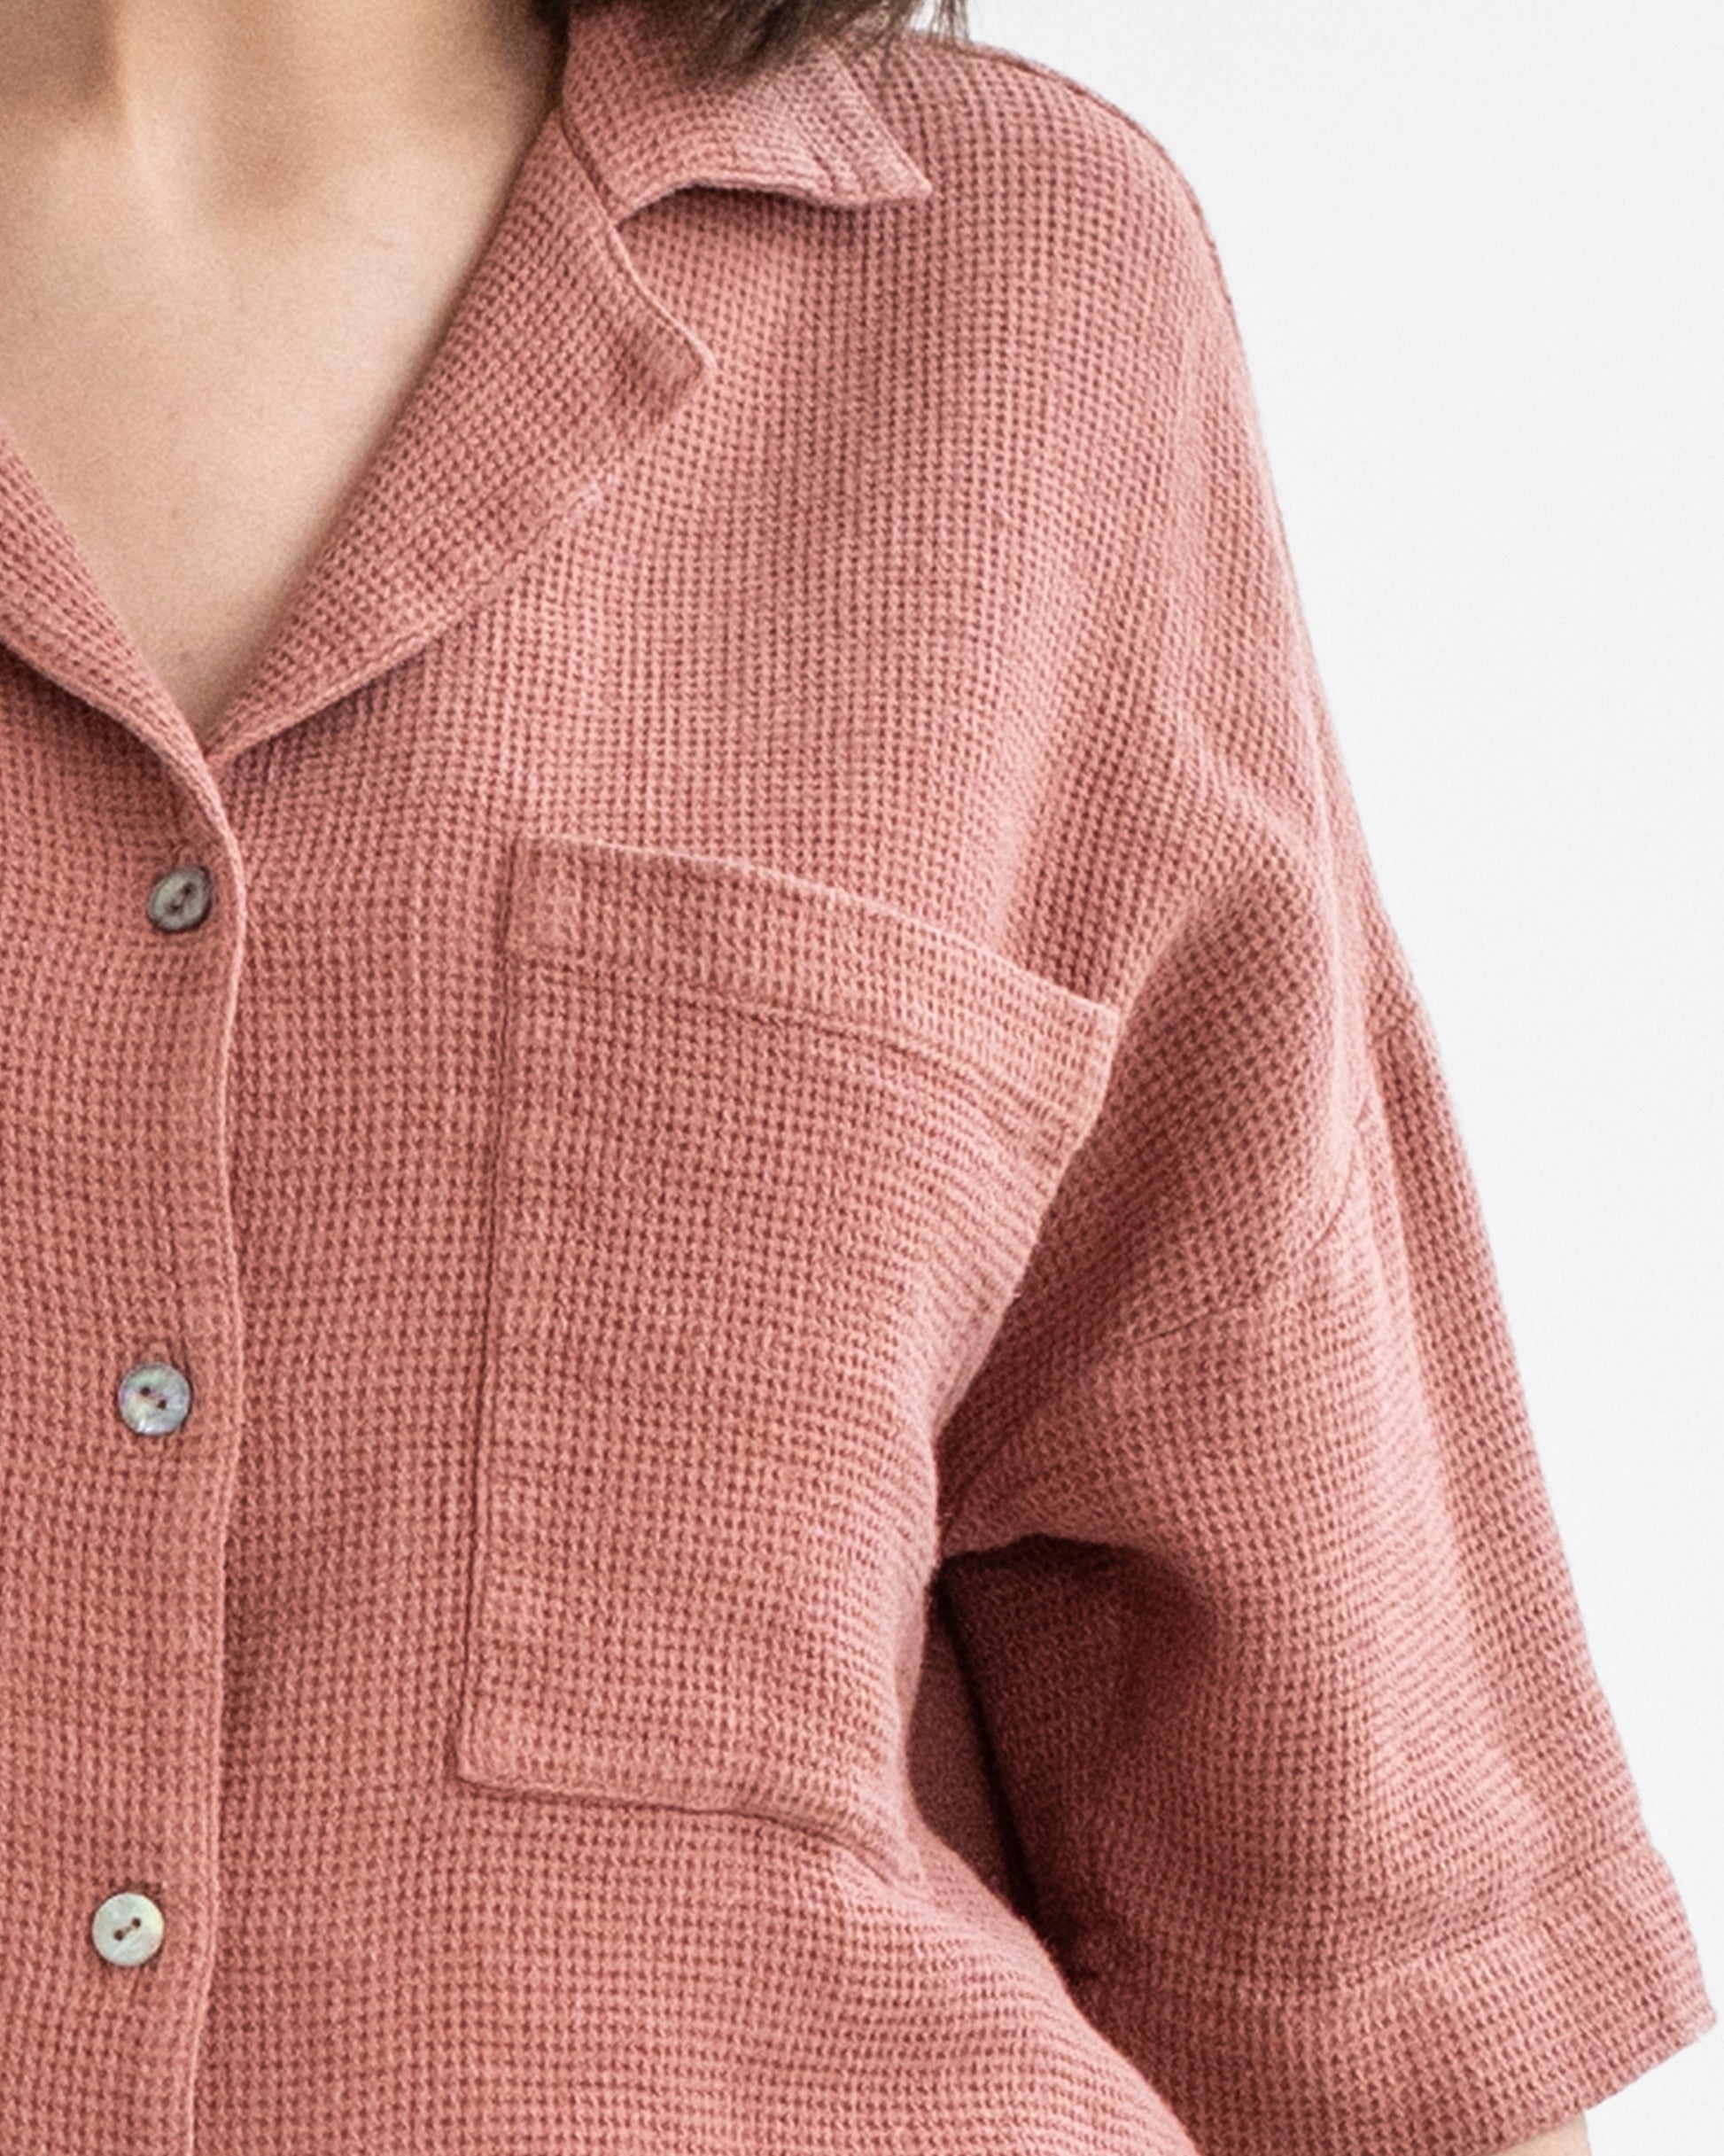 Waffle shirt CHARTRES in Burnt sienna - MagicLinen